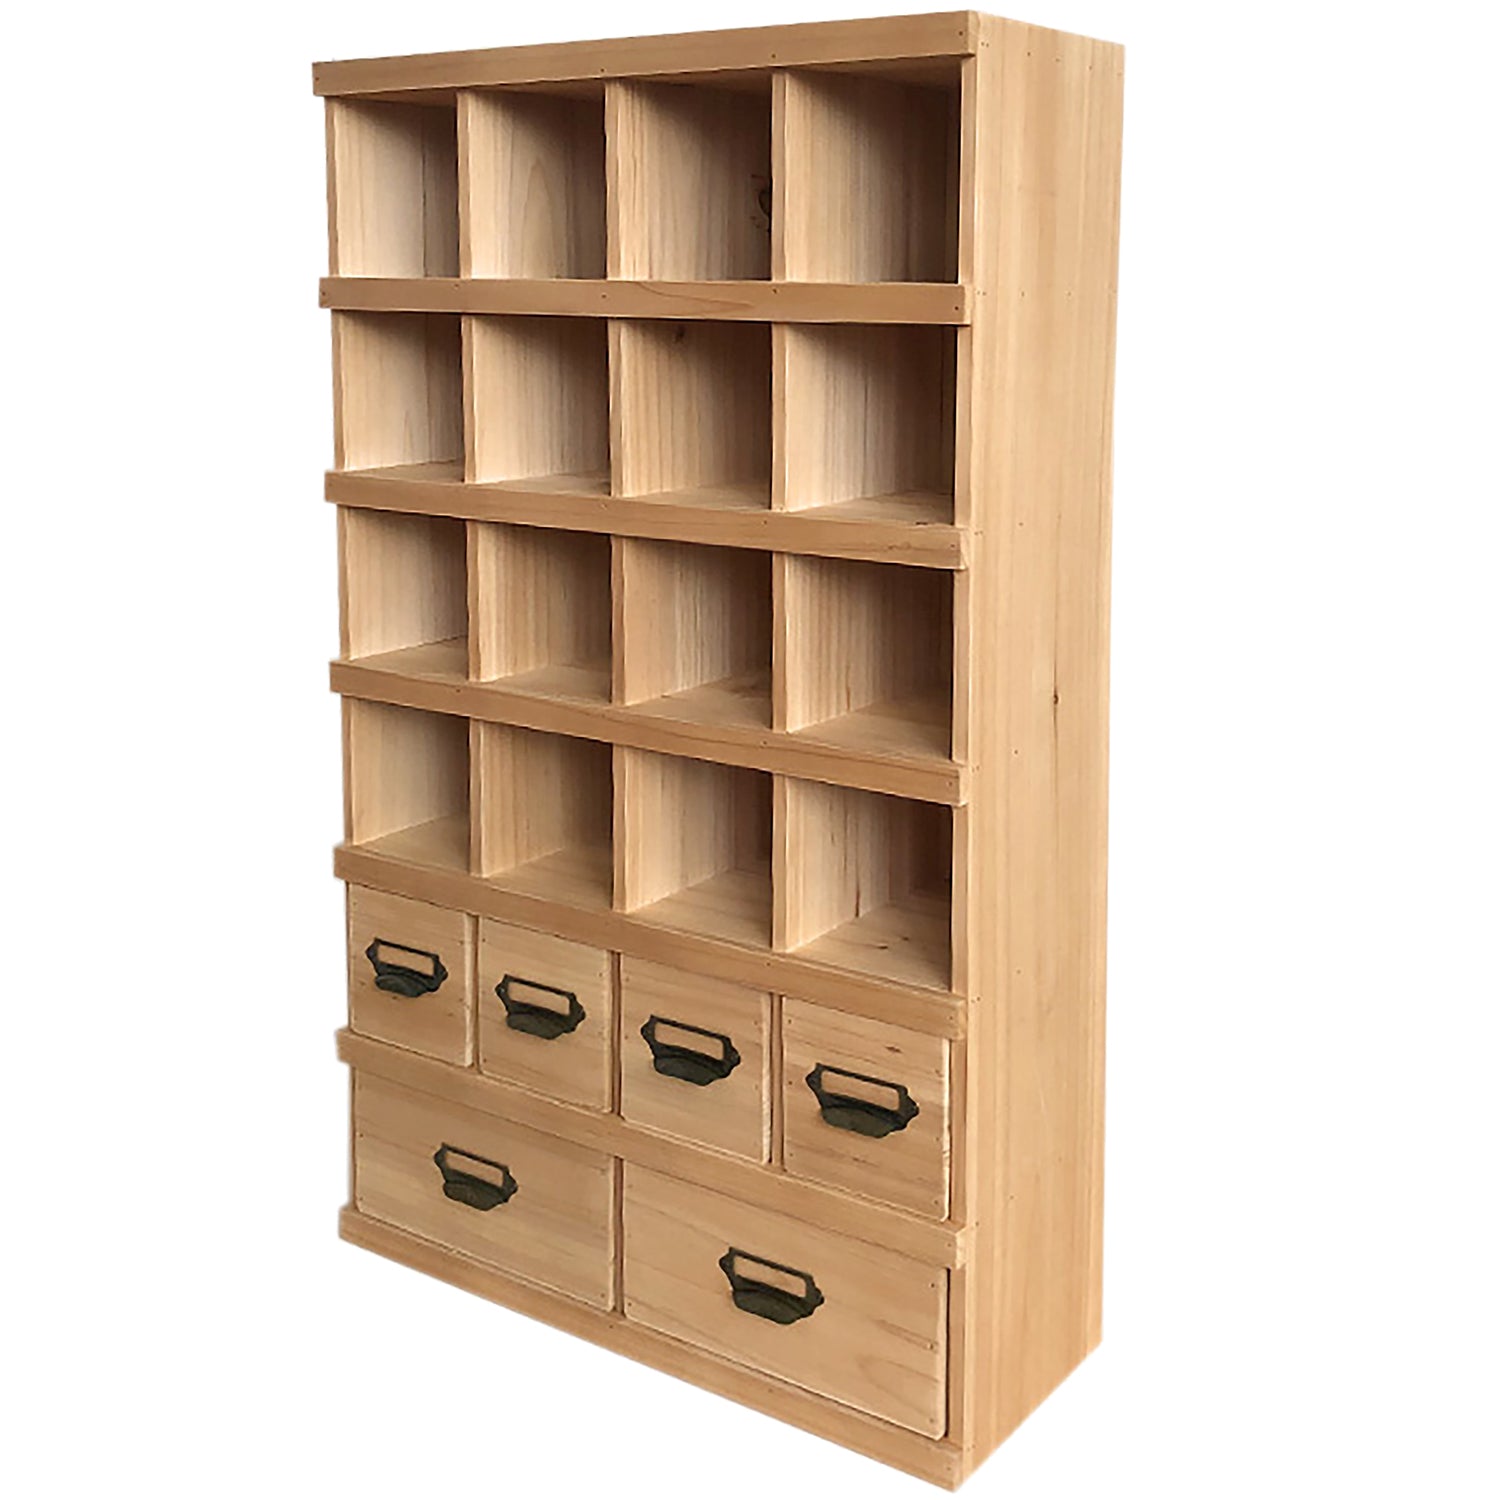 Load image into Gallery viewer, Chest Of Drawers Wood Cubby Cabinet | 12-Slot Wood Shelf w/ 6 Drawers Mailroom Card Organizer